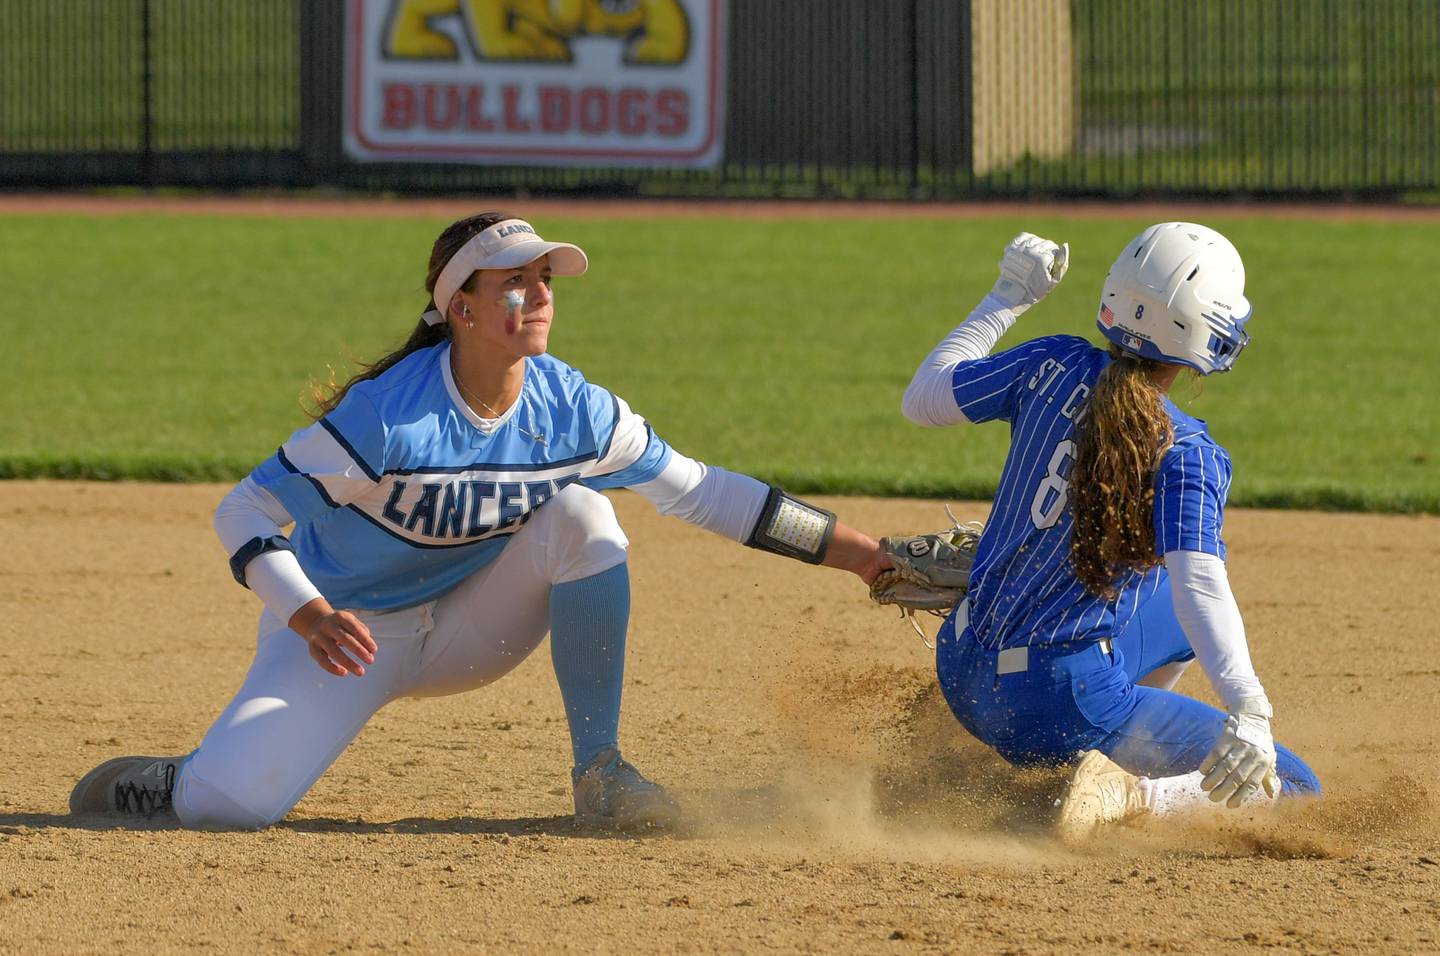 Lake Park's Michela Barbanente (1) makes the tag on St. Charles North's Ginger Ritter (8) for the out during a game in St Charles on Friday, April 21, 2023.